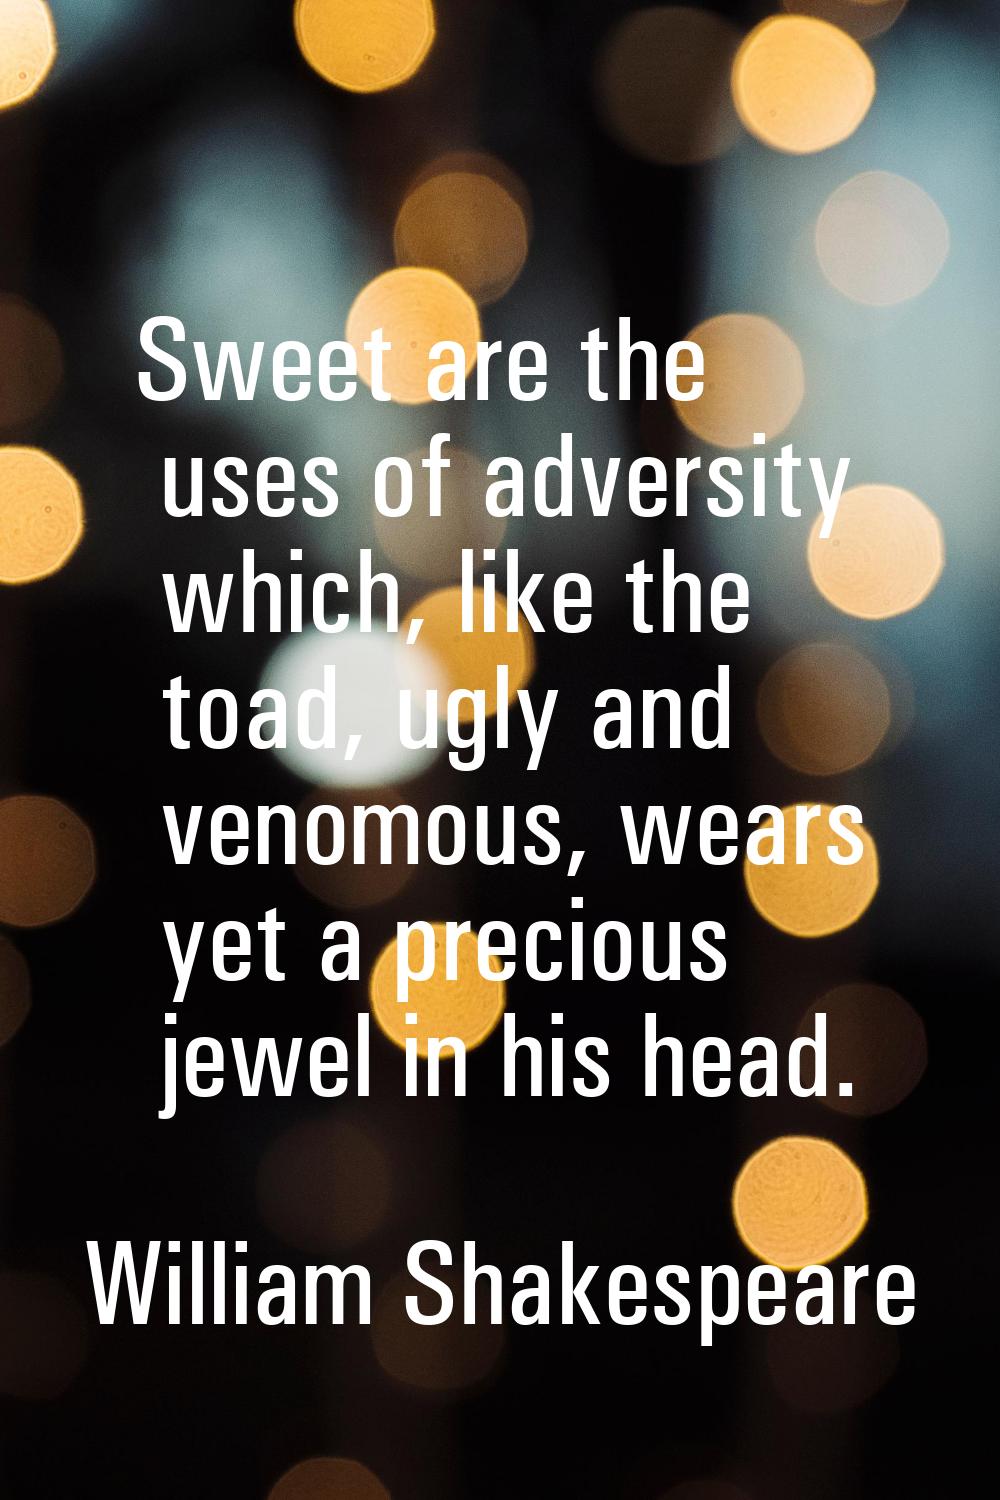 Sweet are the uses of adversity which, like the toad, ugly and venomous, wears yet a precious jewel